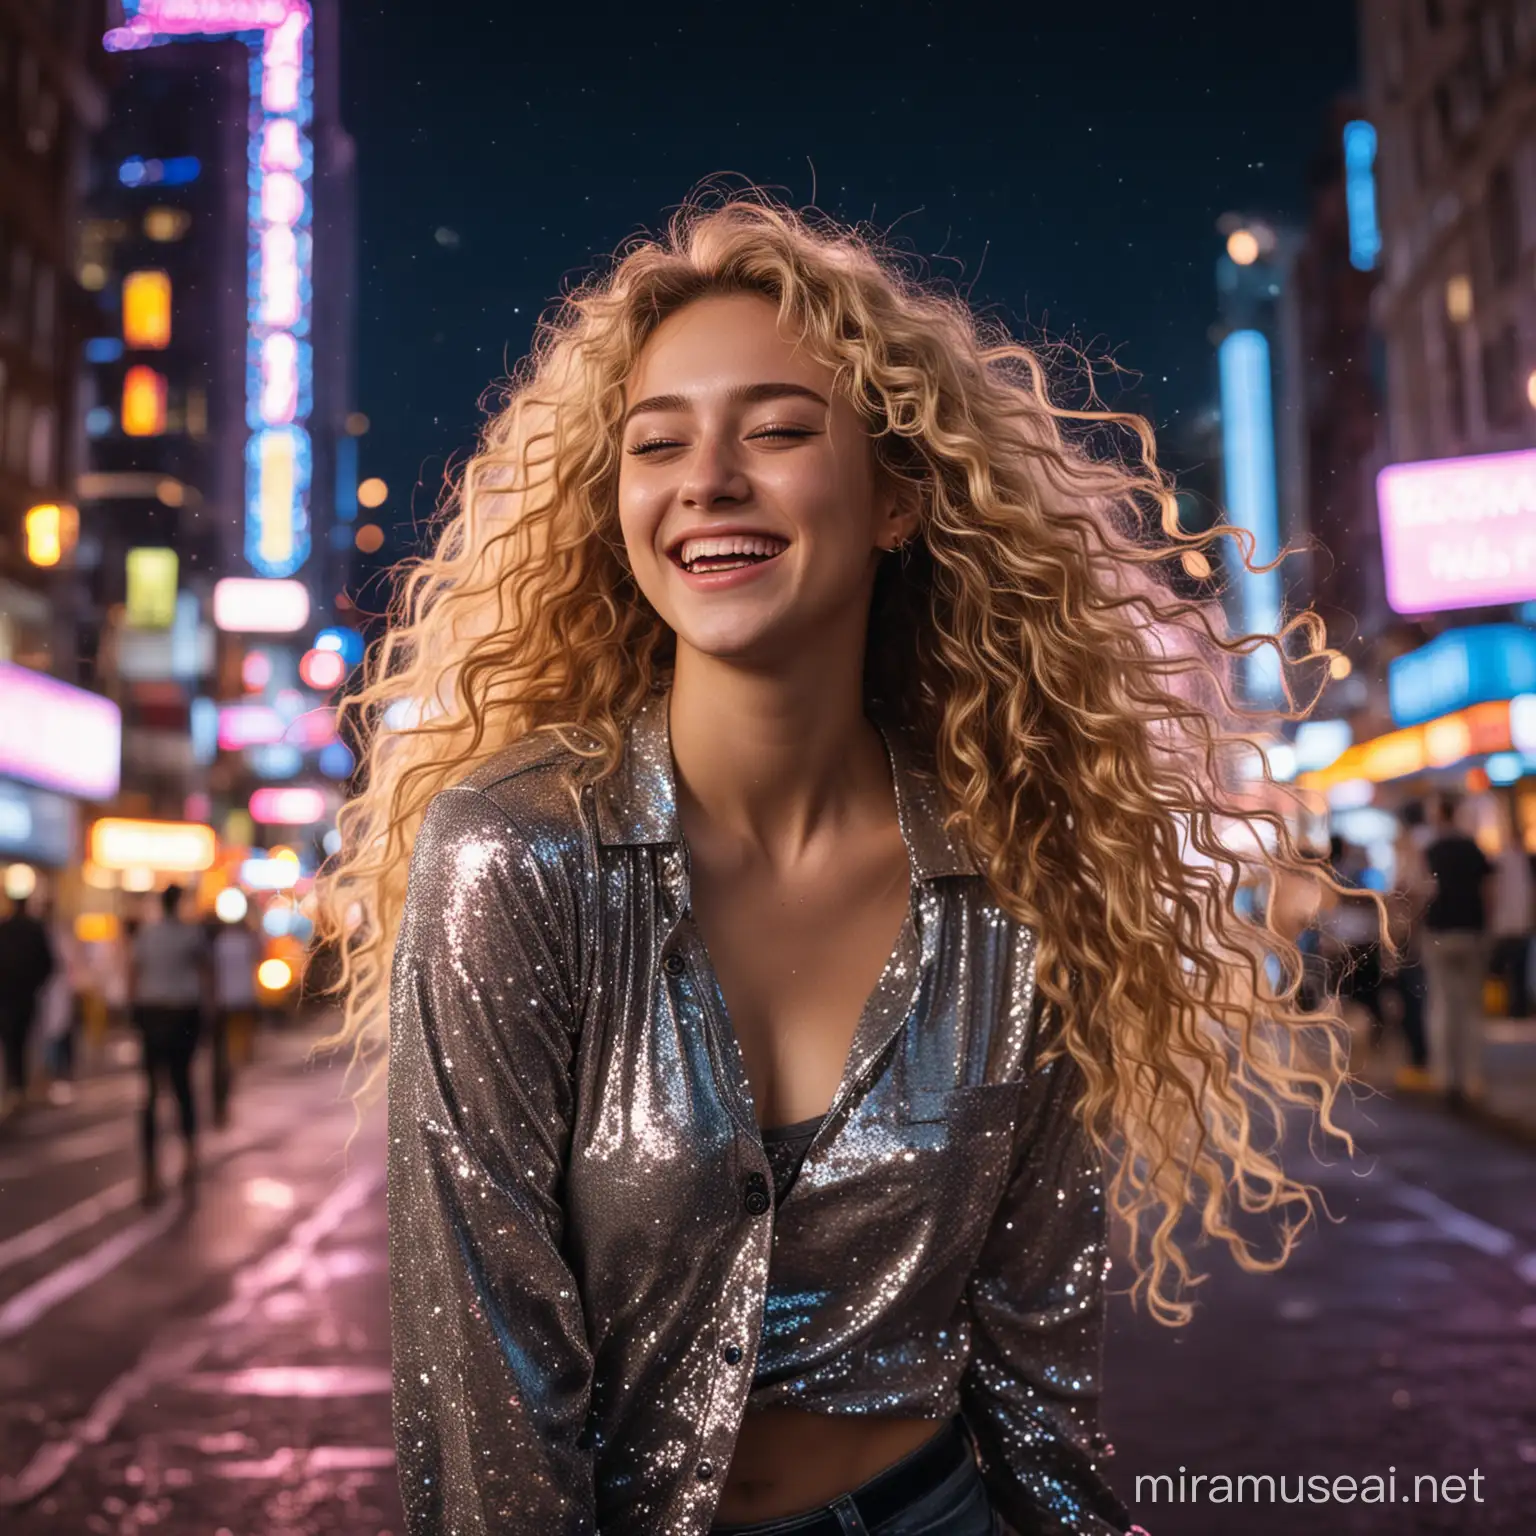 Laughing Girl with Glittery Shirt in City Moonlight